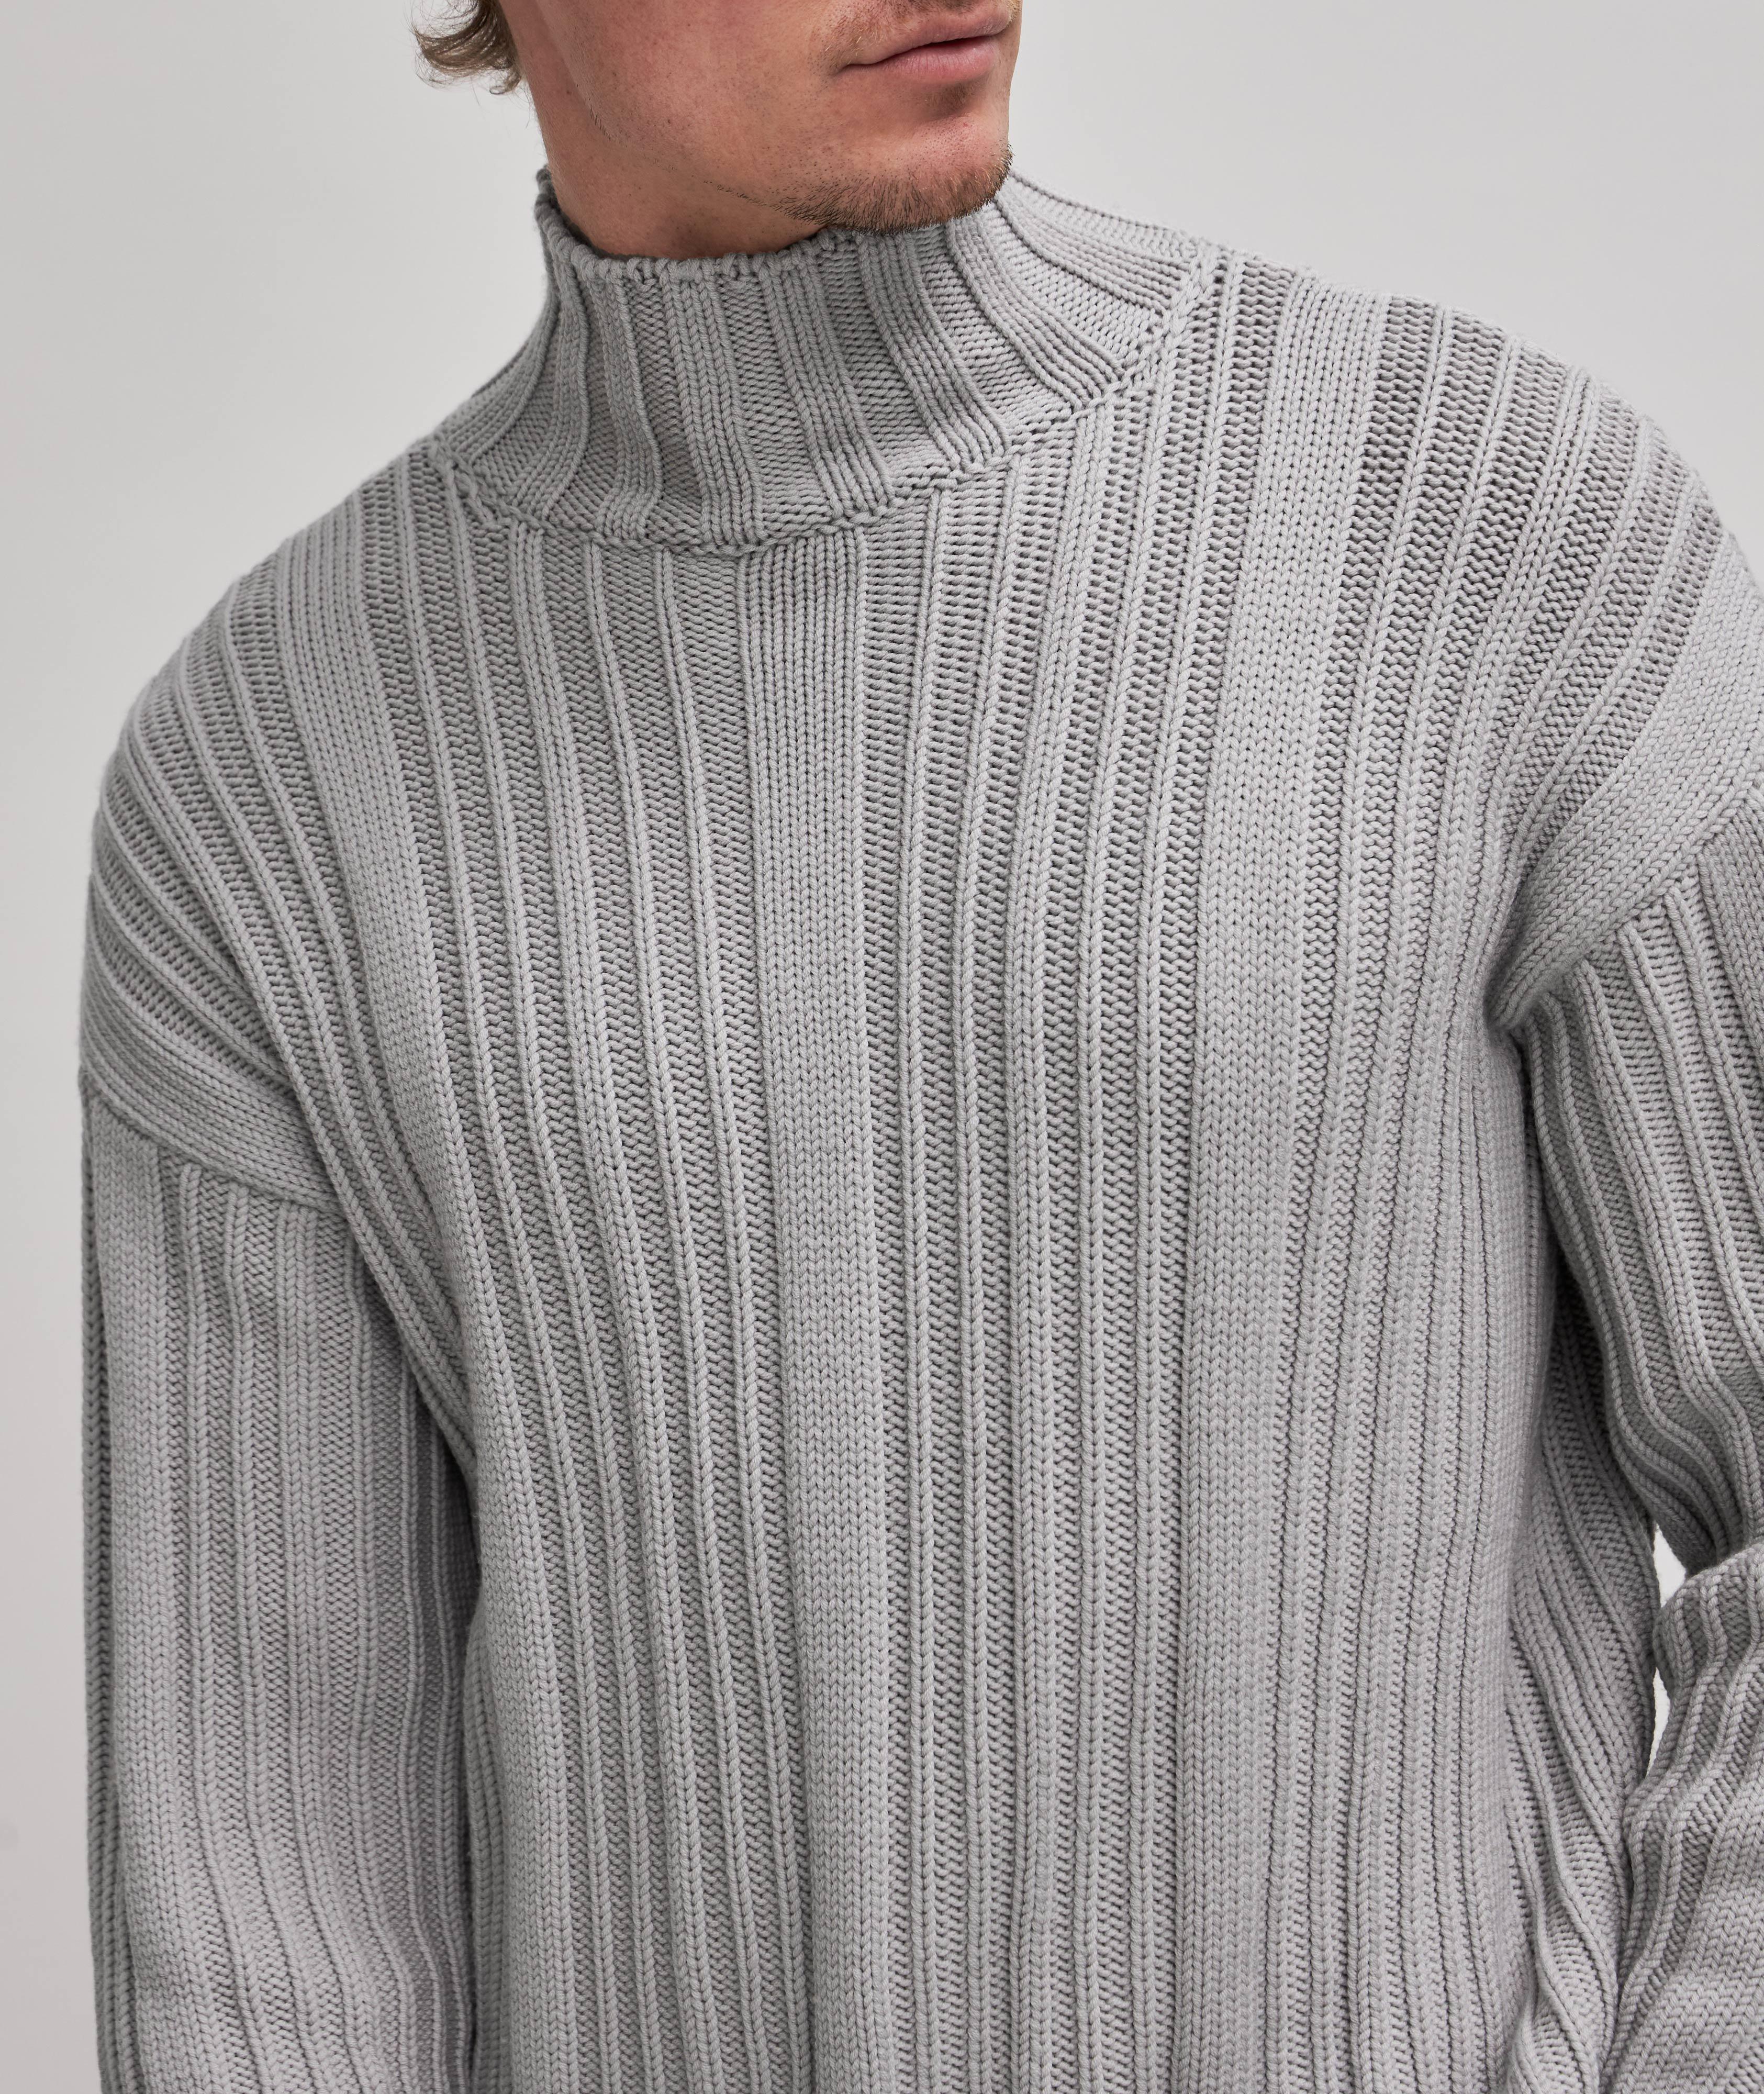 Virgin Wool Thich Rib-Knitted Turtleneck Sweater image 3